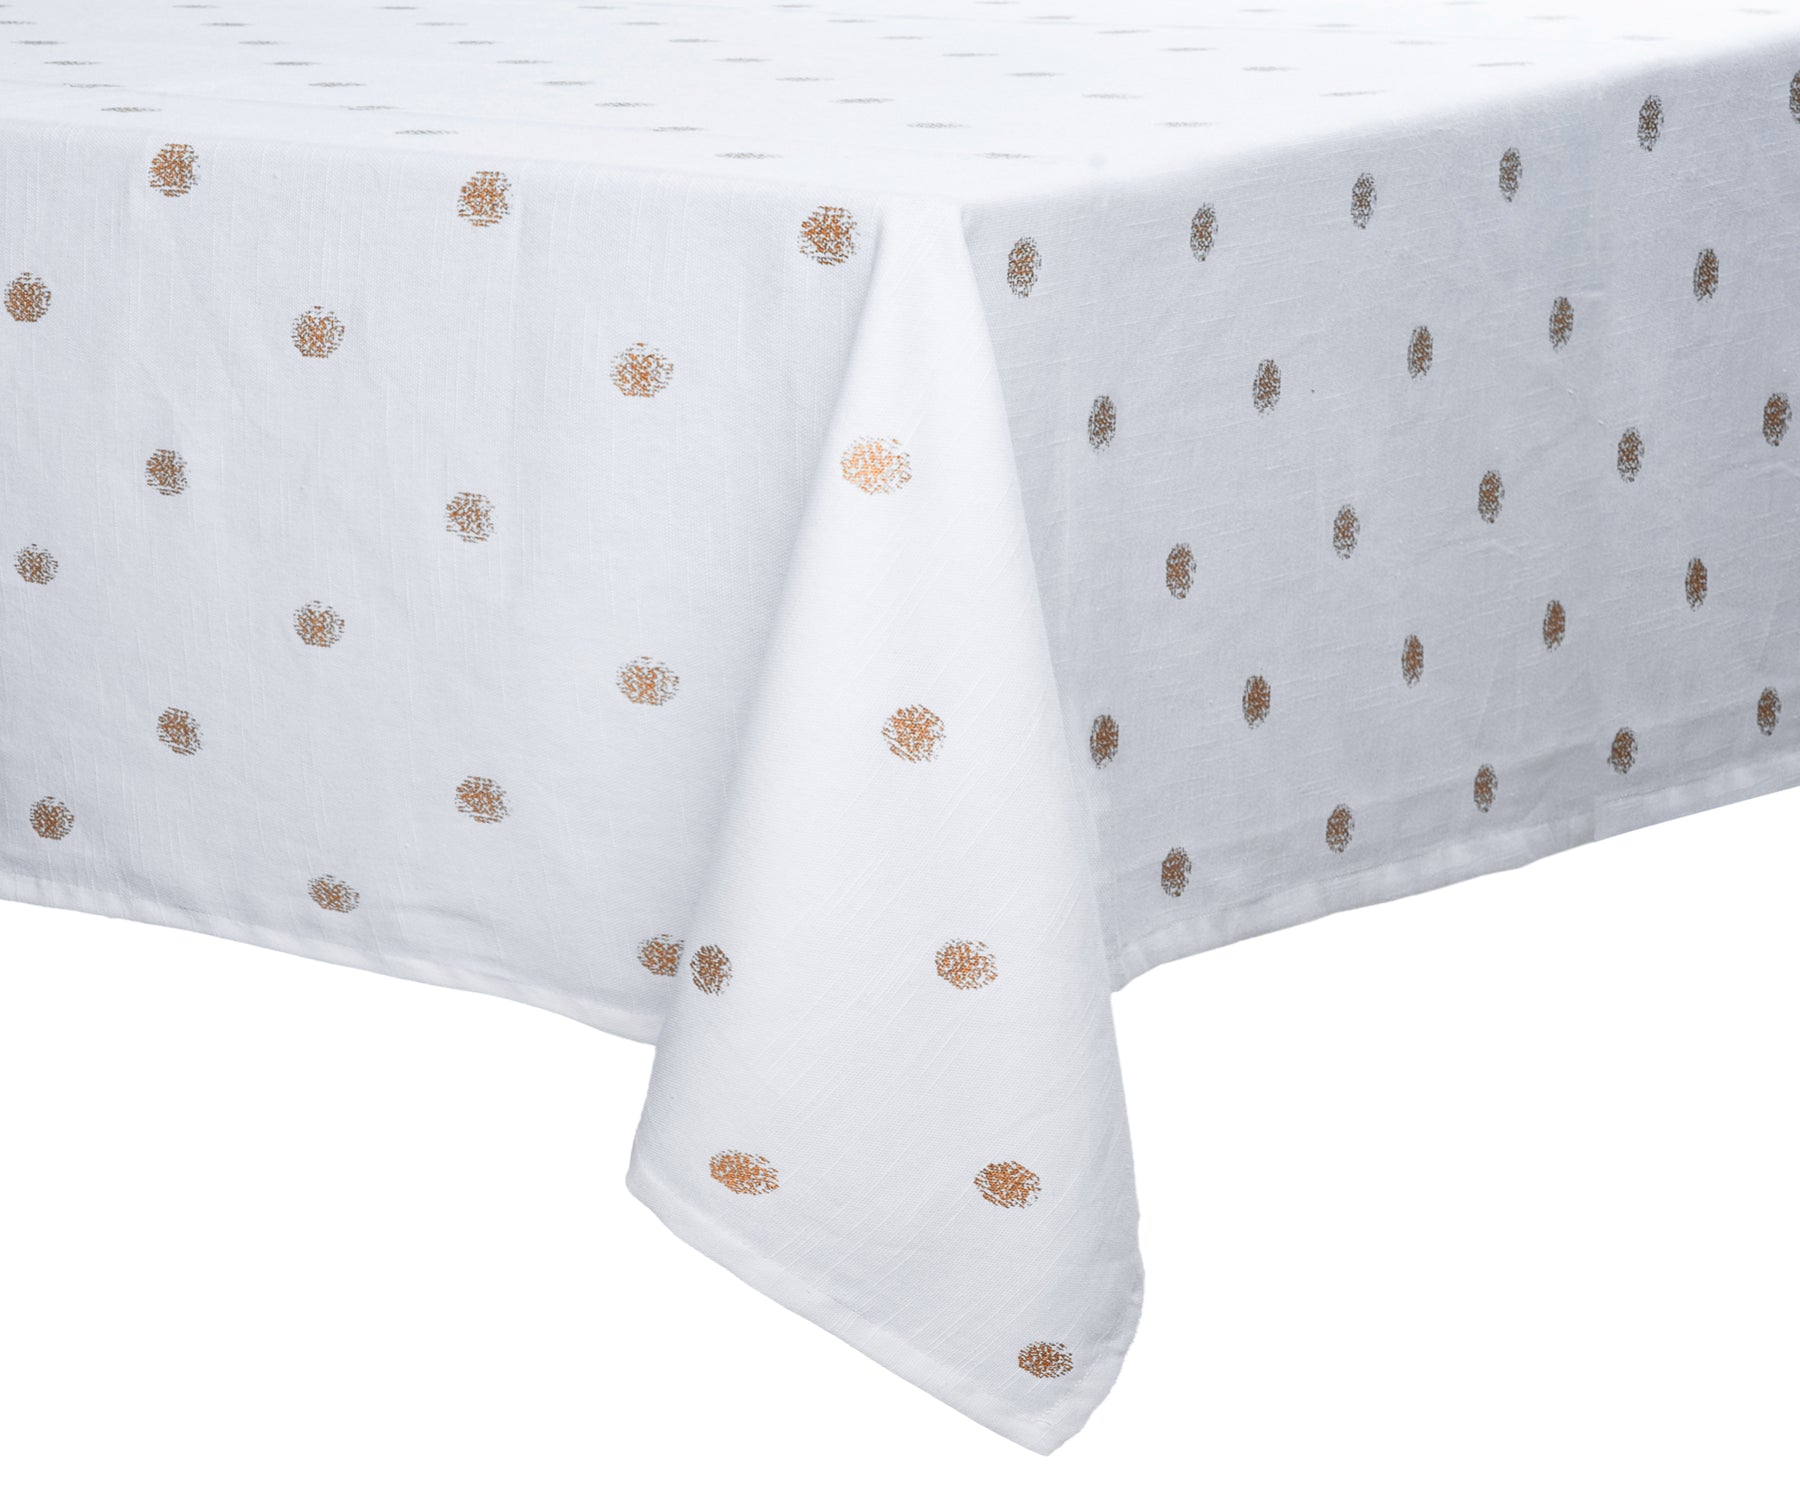 Formal white tablecloth for special occasions.